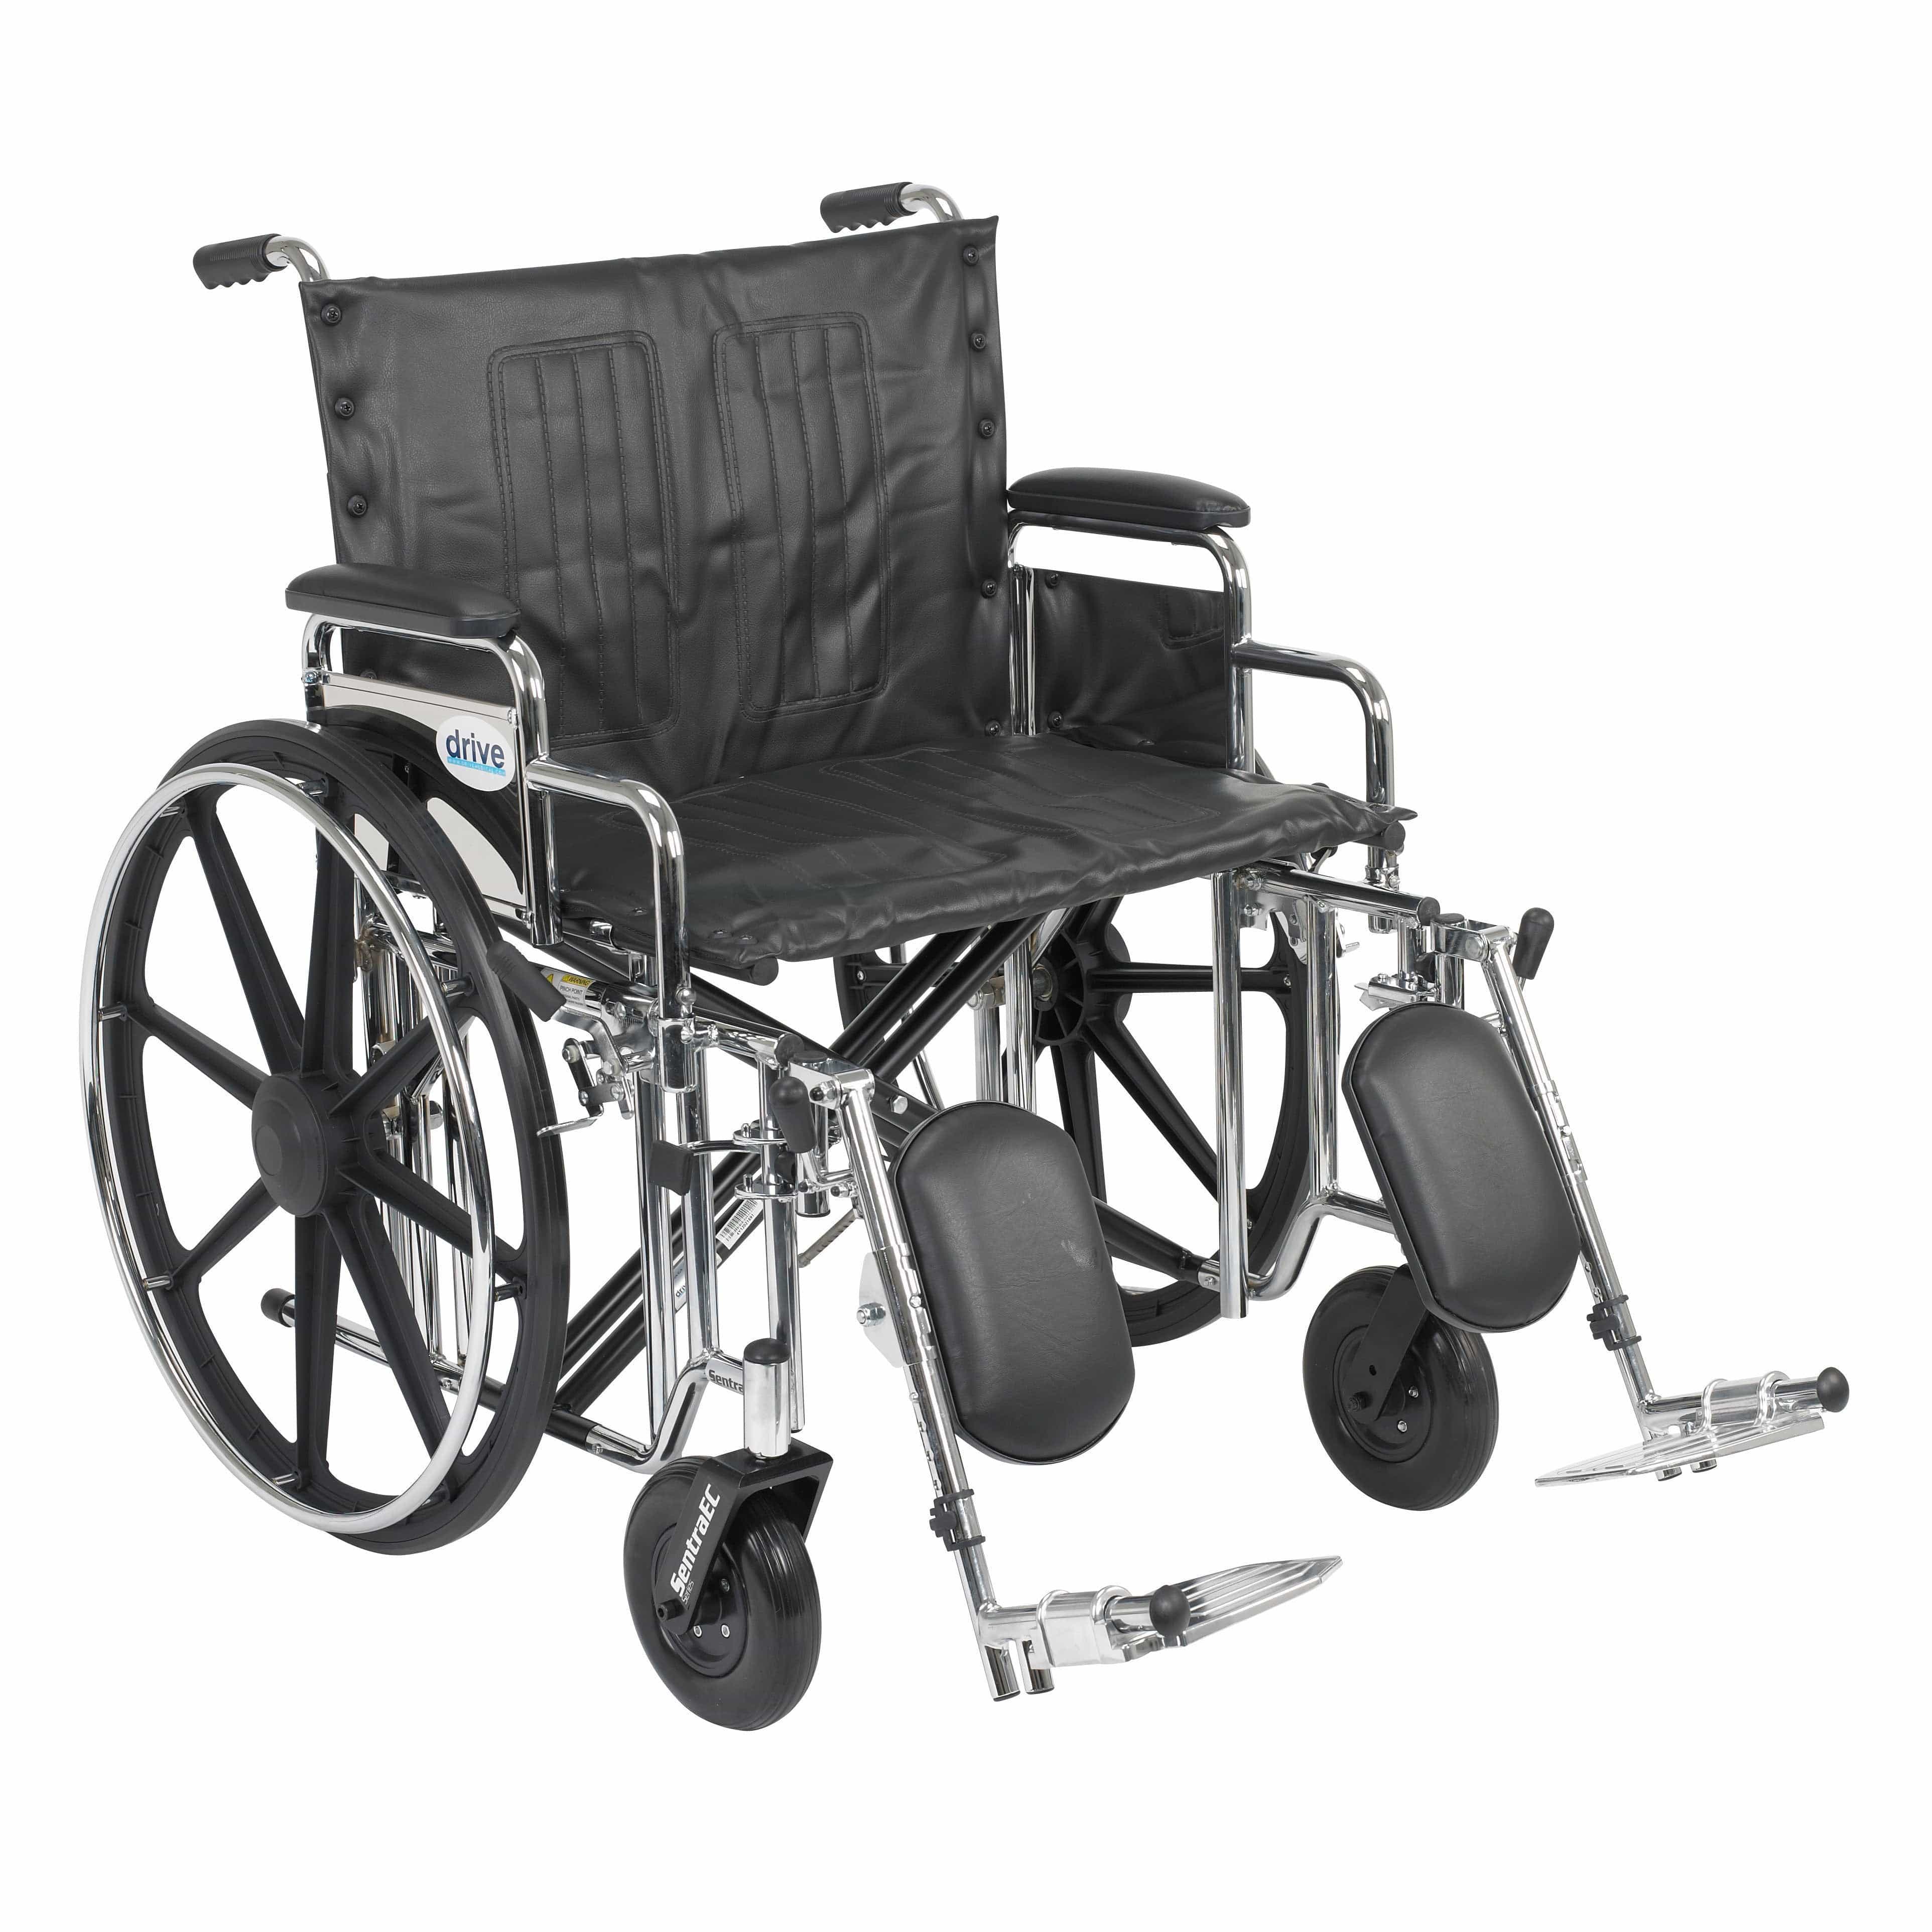 Drive Medical Wheelchairs/Heavy Duty Wheelchairs Detachable Desk Arms and Elevating Leg Rests / 24"Seat Drive Medical Sentra Extra Heavy Duty Wheelchair